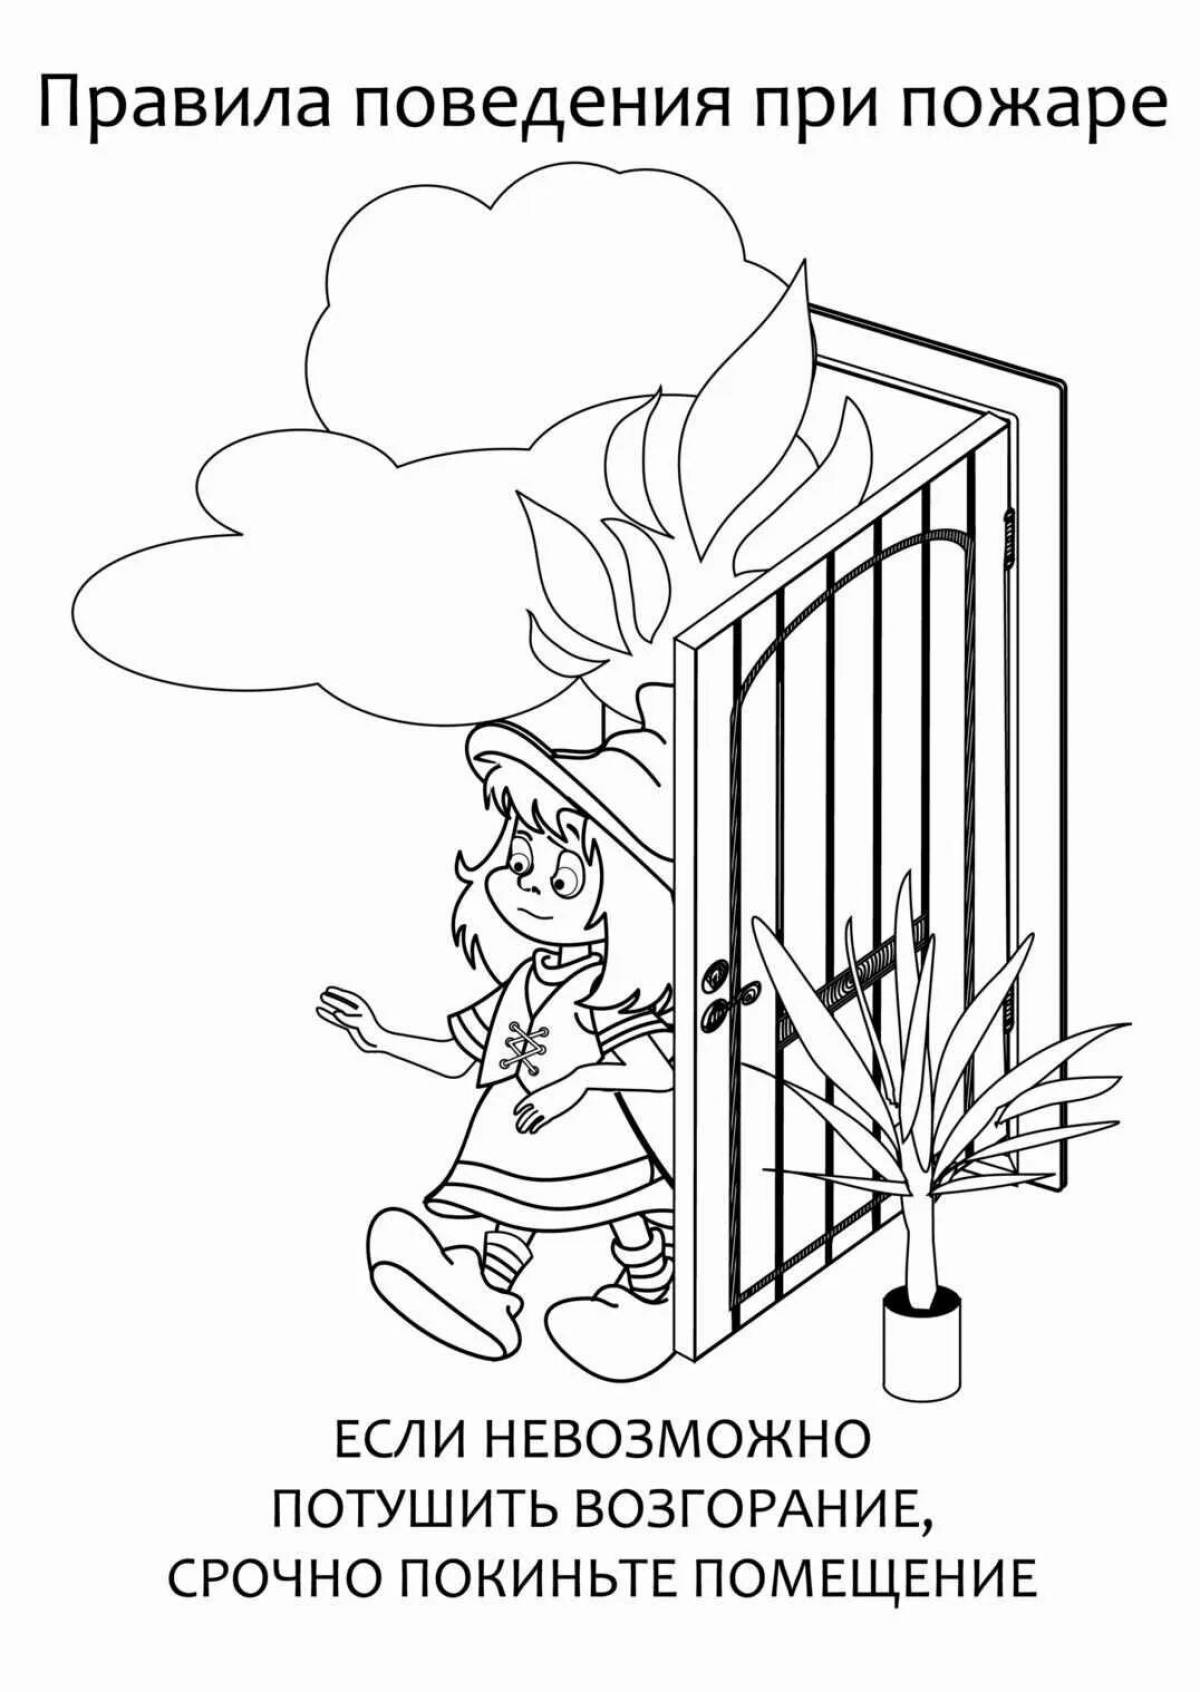 Fire safety rules for children #17